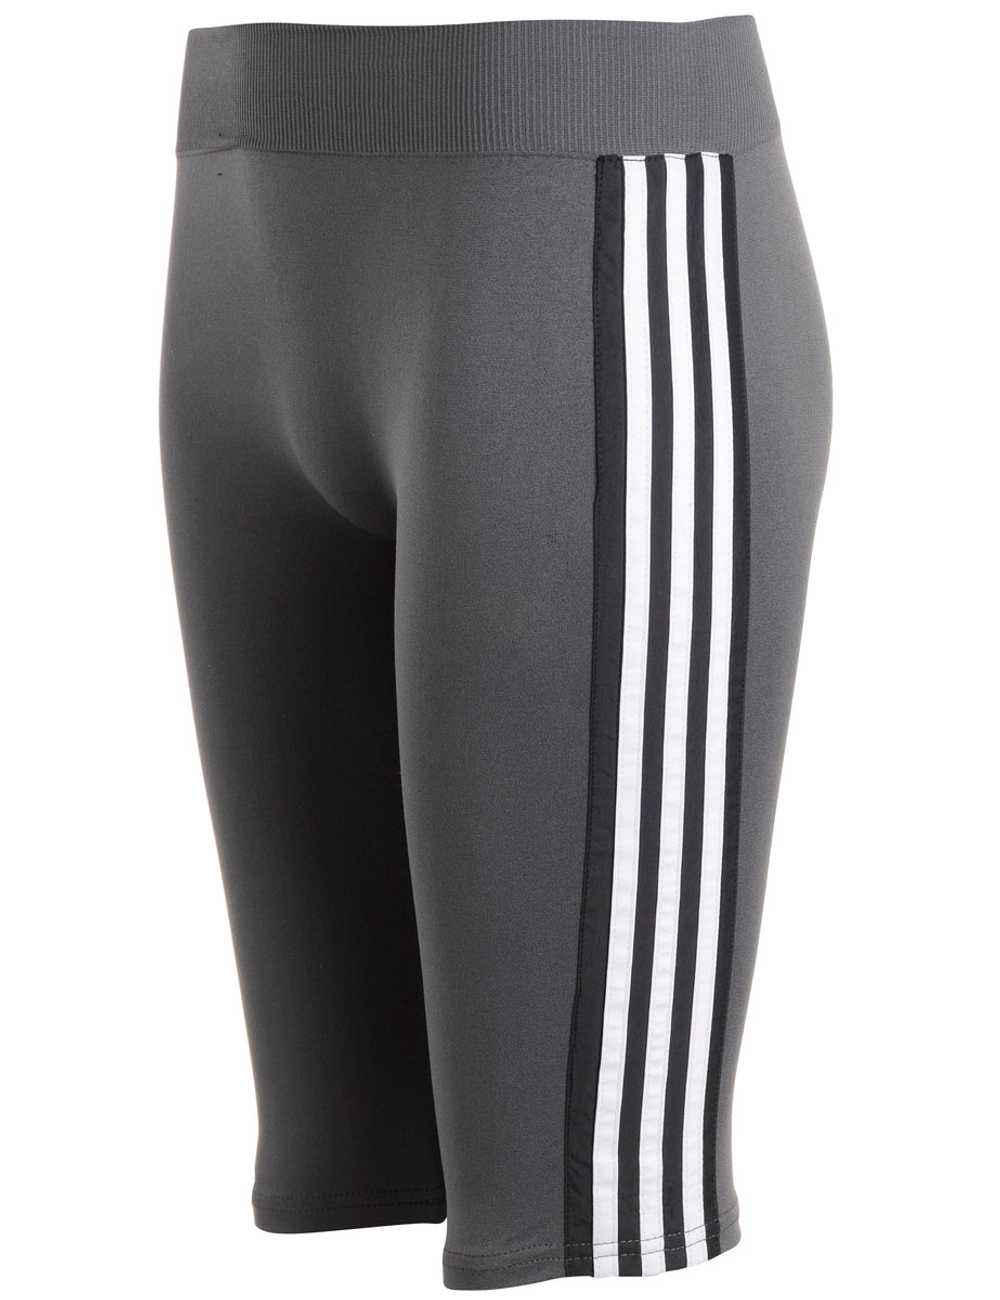 Reworked Three Stripe Cycling Shorts - W24 - image 1